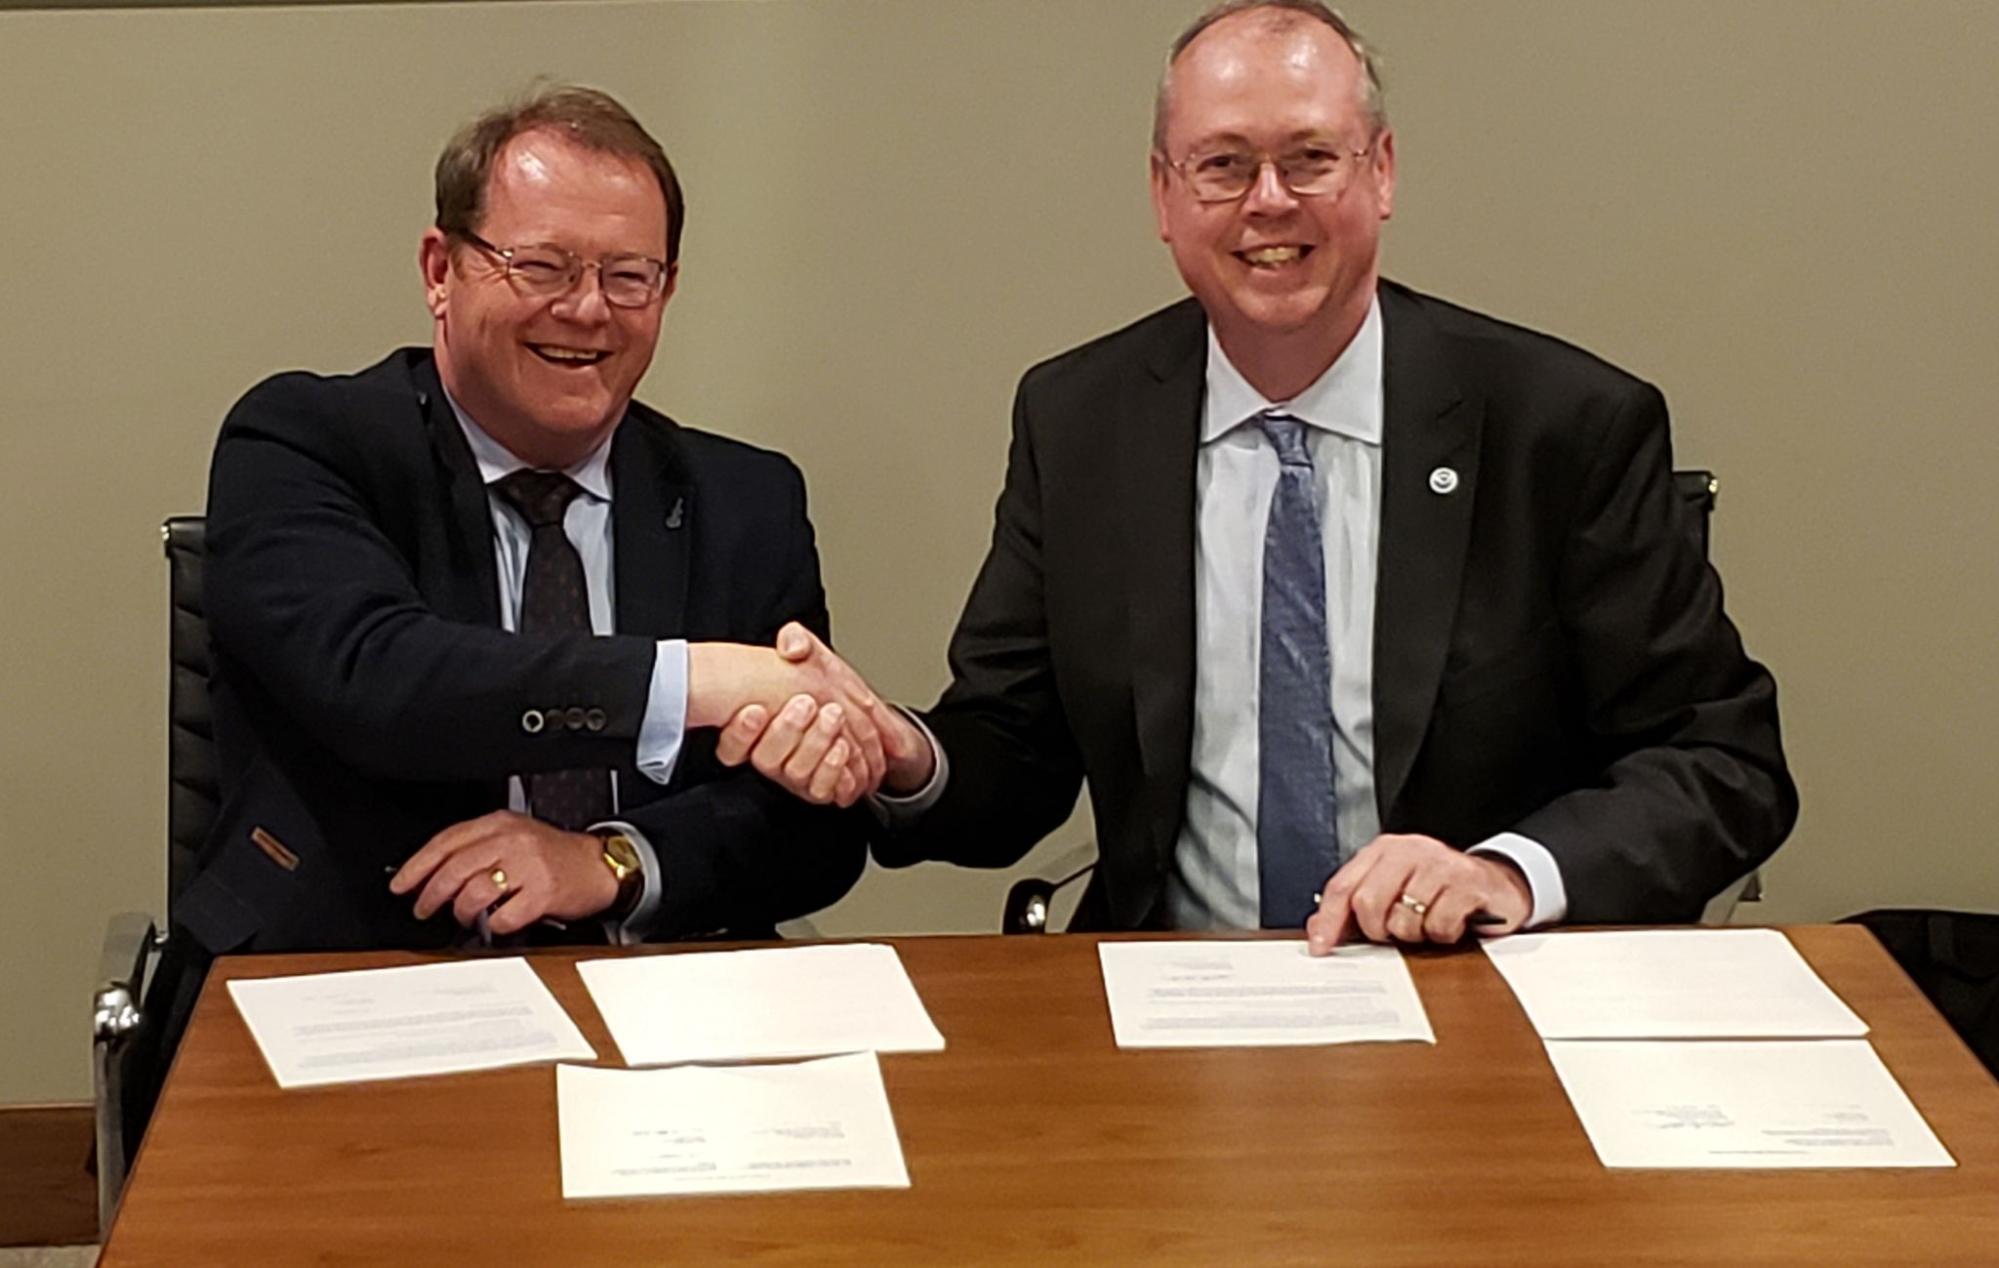 United Kingdom’s Met Office Markets Director Ian Cameron (left) and National Weather Service Director Ken Graham (right) sign a Memorandum of Understanding agreeing to increased collaboration on space weather operations